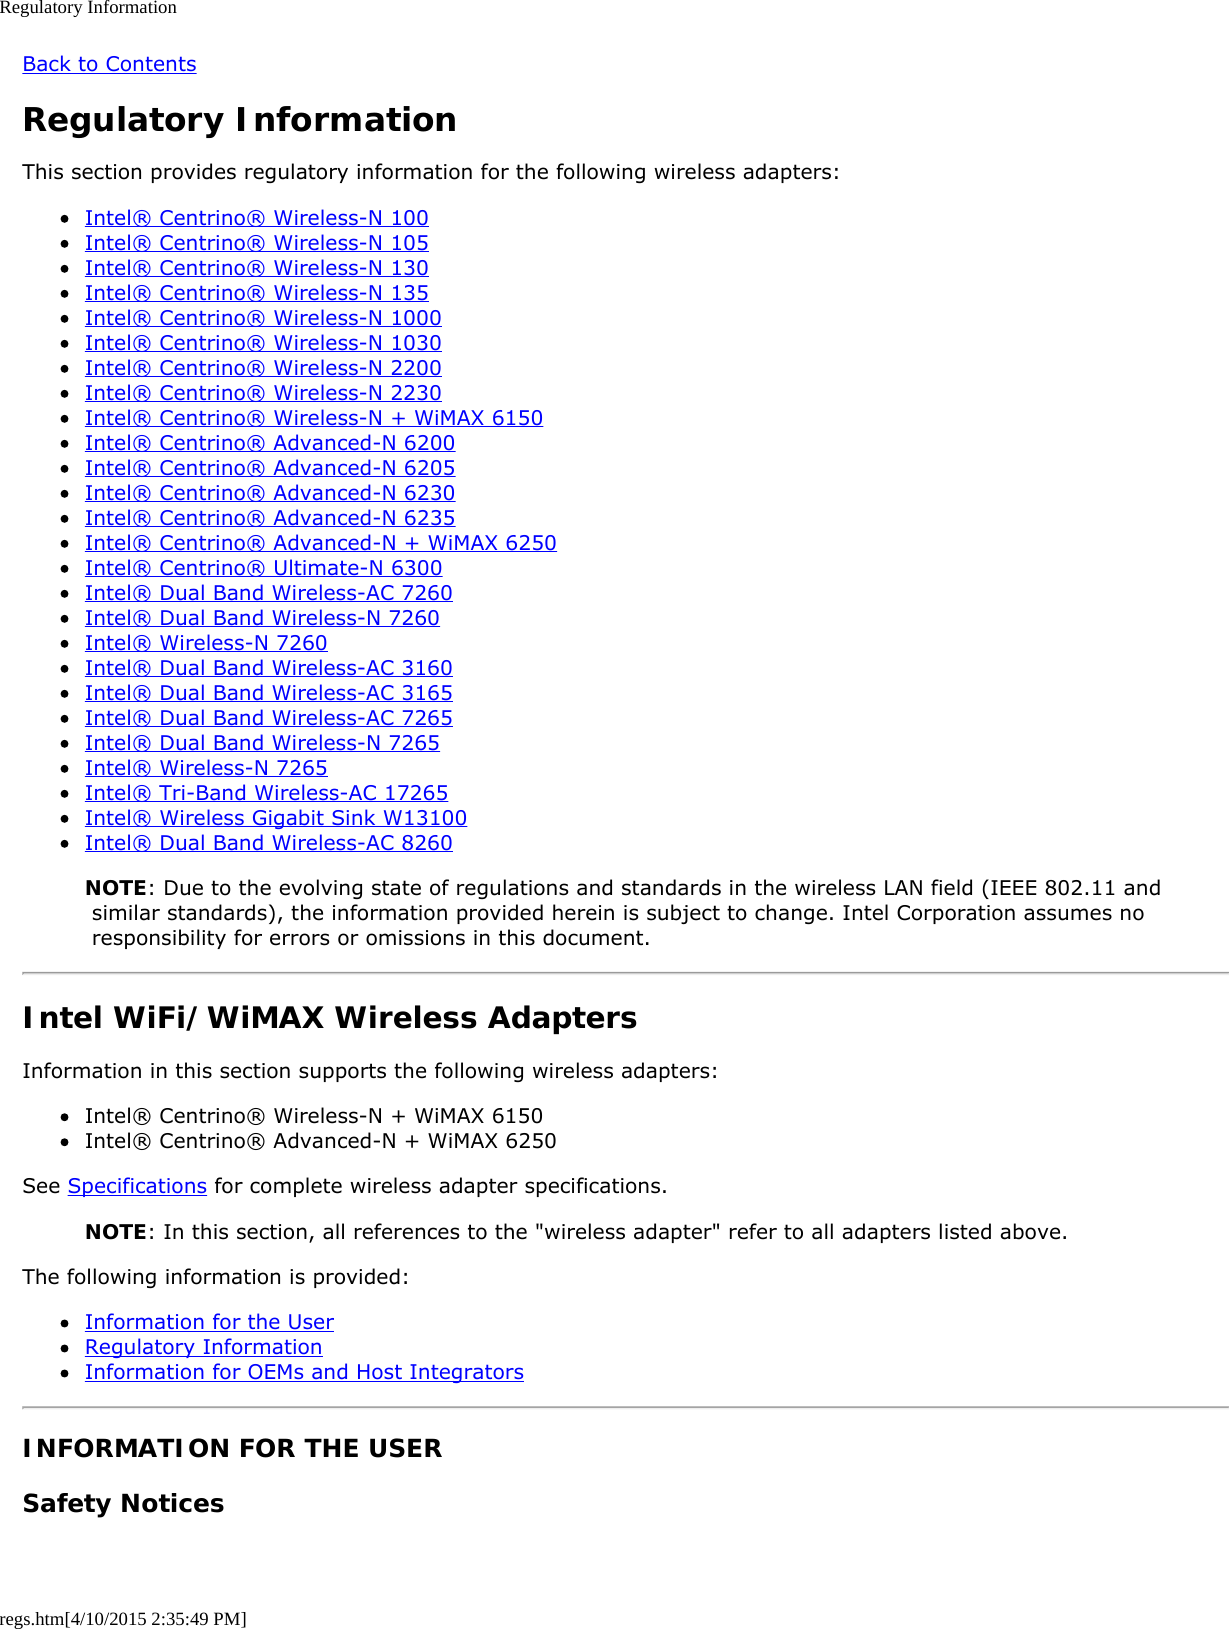 Regulatory Informationregs.htm[4/10/2015 2:35:49 PM]Back to ContentsRegulatory InformationThis section provides regulatory information for the following wireless adapters:Intel® Centrino® Wireless-N 100Intel® Centrino® Wireless-N 105Intel® Centrino® Wireless-N 130Intel® Centrino® Wireless-N 135Intel® Centrino® Wireless-N 1000Intel® Centrino® Wireless-N 1030Intel® Centrino® Wireless-N 2200Intel® Centrino® Wireless-N 2230Intel® Centrino® Wireless-N + WiMAX 6150Intel® Centrino® Advanced-N 6200Intel® Centrino® Advanced-N 6205Intel® Centrino® Advanced-N 6230Intel® Centrino® Advanced-N 6235Intel® Centrino® Advanced-N + WiMAX 6250Intel® Centrino® Ultimate-N 6300Intel® Dual Band Wireless-AC 7260Intel® Dual Band Wireless-N 7260Intel® Wireless-N 7260Intel® Dual Band Wireless-AC 3160Intel® Dual Band Wireless-AC 3165Intel® Dual Band Wireless-AC 7265Intel® Dual Band Wireless-N 7265Intel® Wireless-N 7265Intel® Tri-Band Wireless-AC 17265Intel® Wireless Gigabit Sink W13100Intel® Dual Band Wireless-AC 8260NOTE: Due to the evolving state of regulations and standards in the wireless LAN field (IEEE 802.11 and similar standards), the information provided herein is subject to change. Intel Corporation assumes no responsibility for errors or omissions in this document.Intel WiFi/WiMAX Wireless AdaptersInformation in this section supports the following wireless adapters:Intel® Centrino® Wireless-N + WiMAX 6150Intel® Centrino® Advanced-N + WiMAX 6250See Specifications for complete wireless adapter specifications.NOTE: In this section, all references to the &quot;wireless adapter&quot; refer to all adapters listed above.The following information is provided:Information for the UserRegulatory InformationInformation for OEMs and Host IntegratorsINFORMATION FOR THE USERSafety Notices